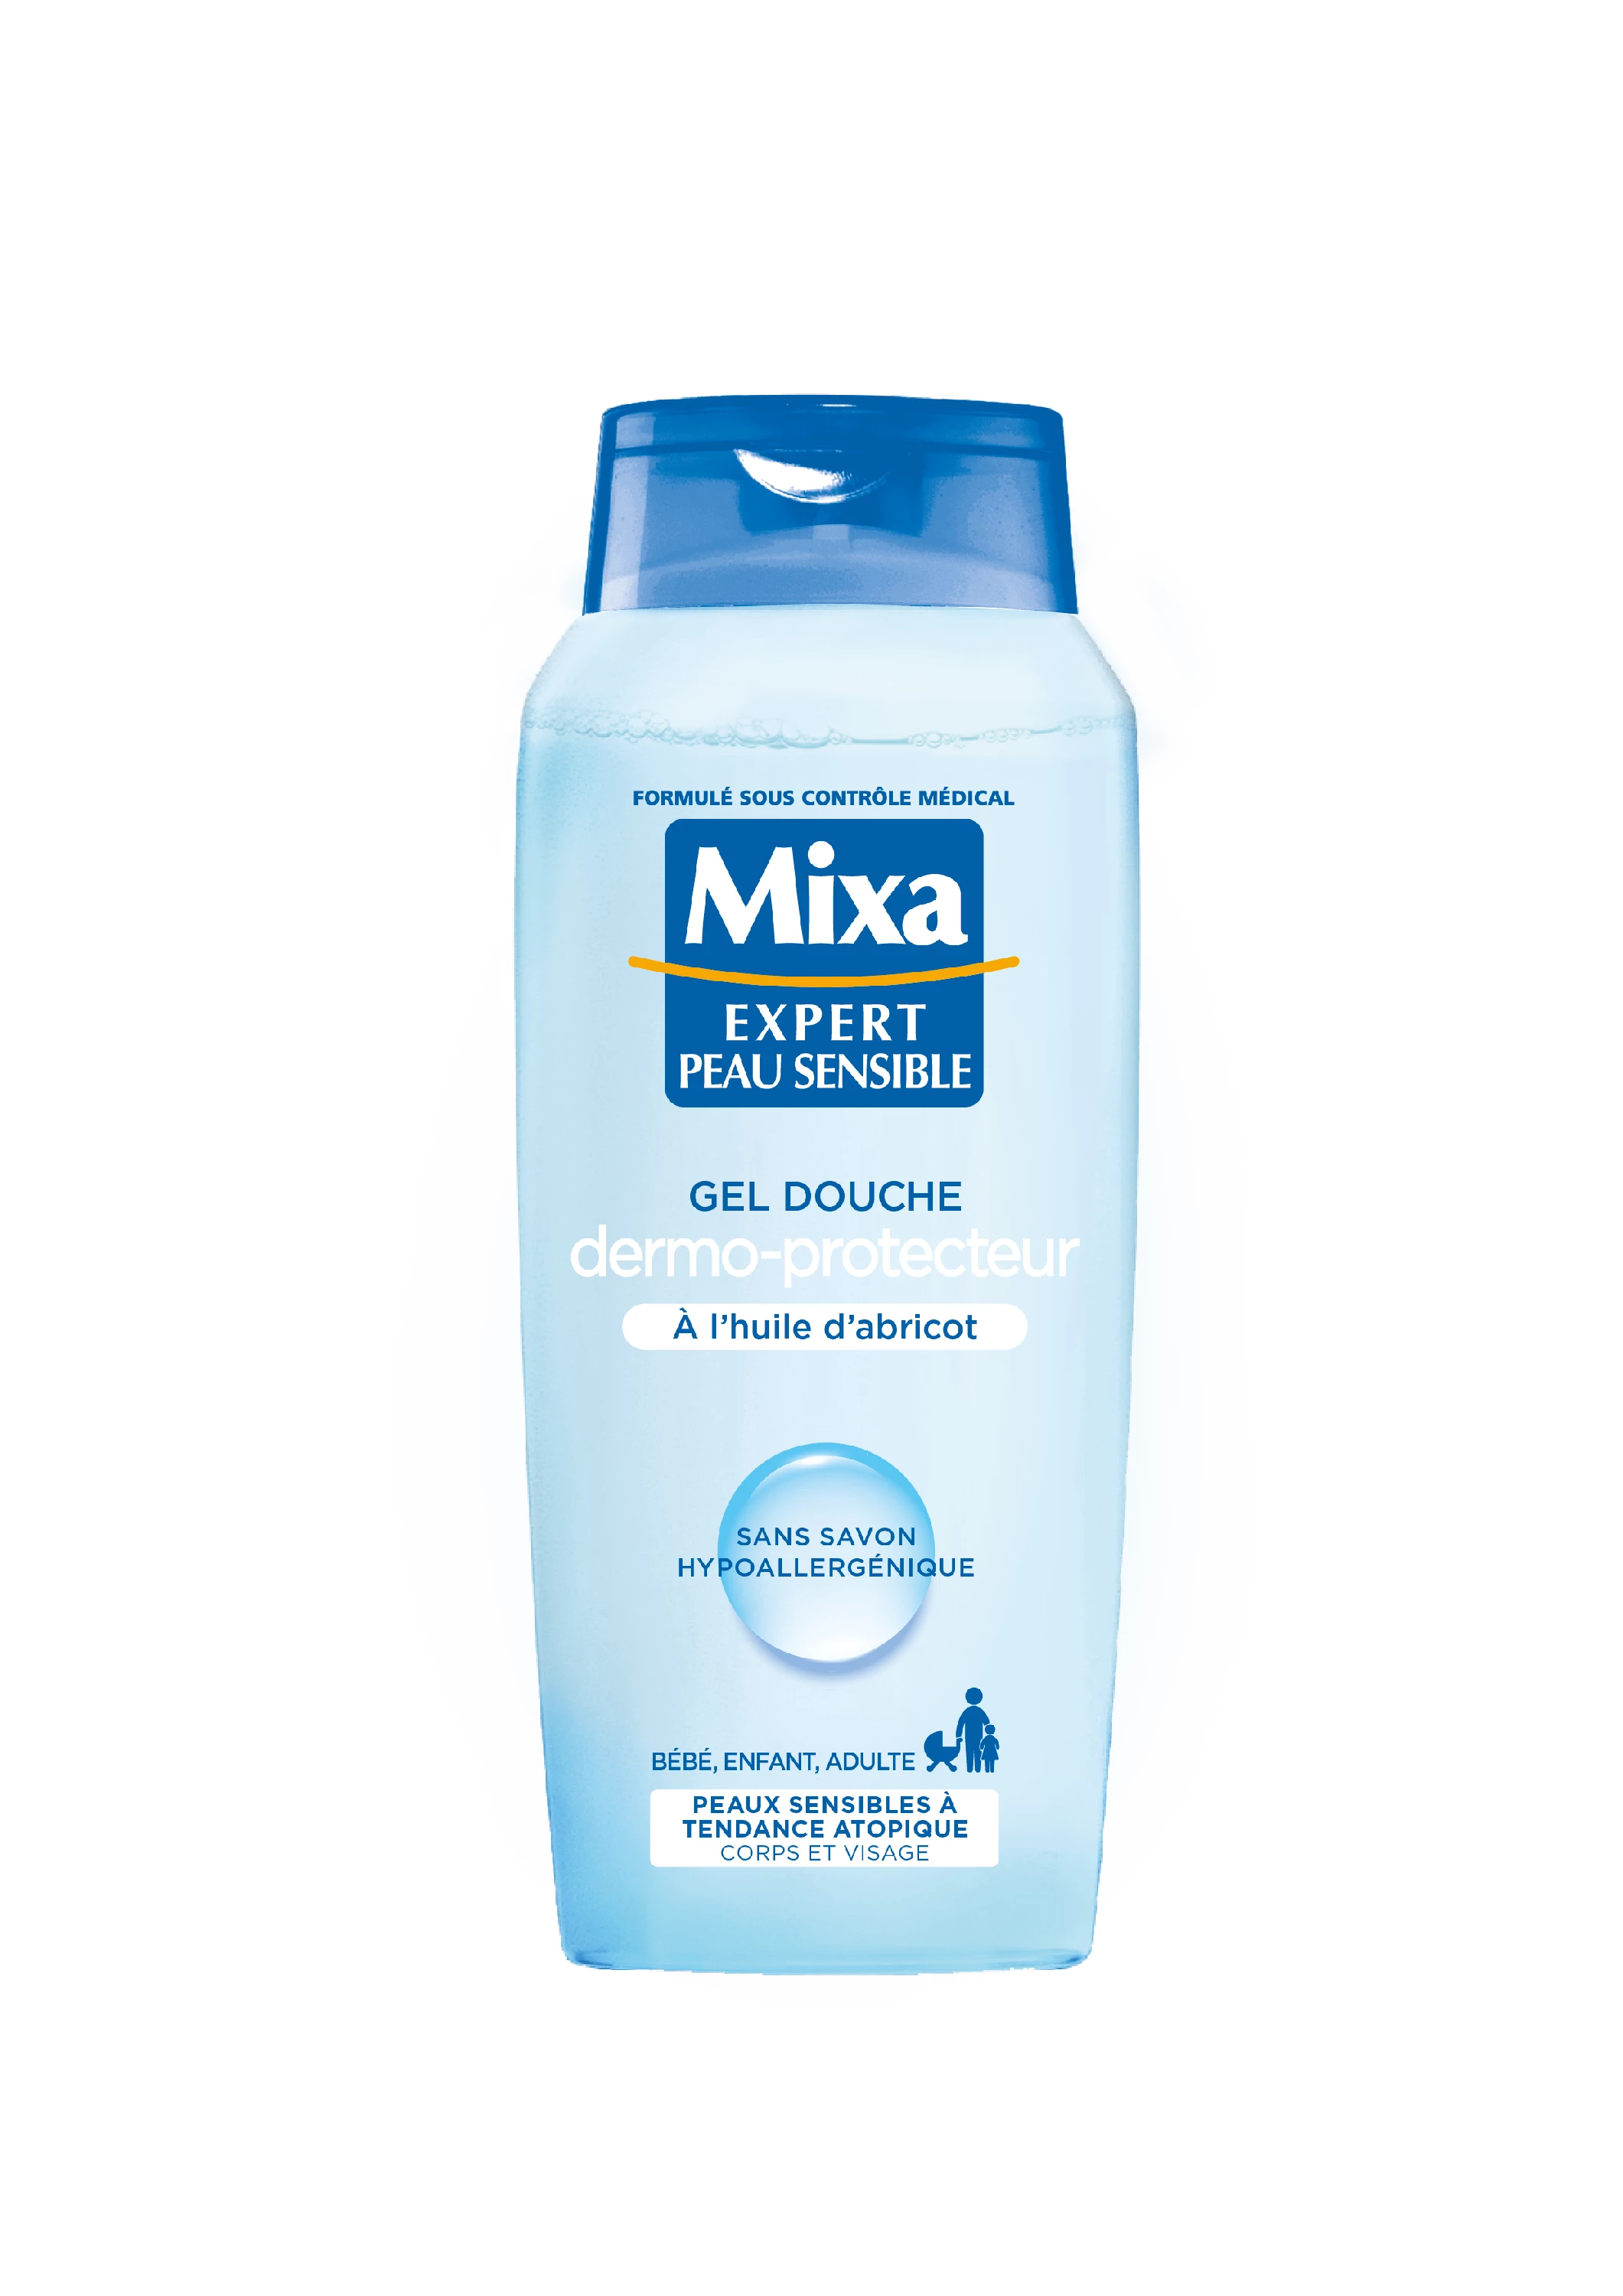 Miha Dx Dermo Proteger 400ml